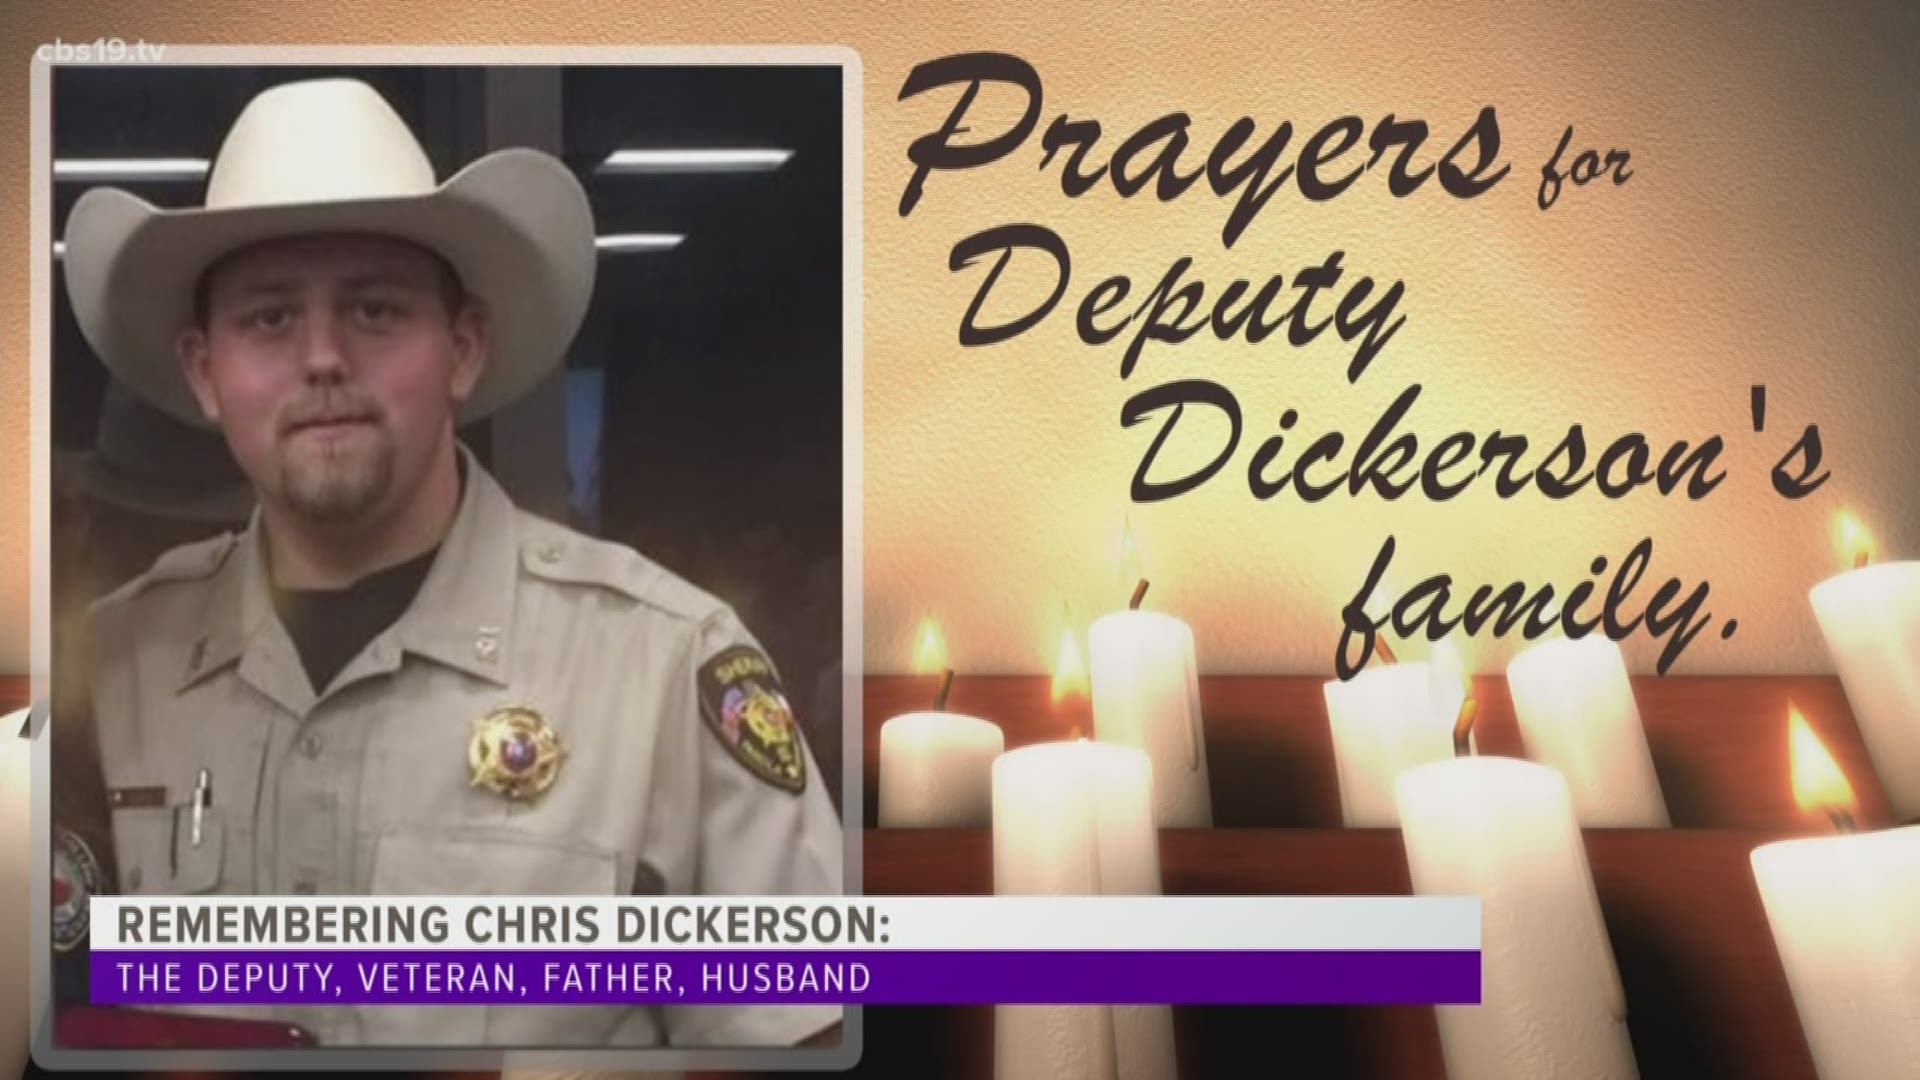 Deputy Chris Dickerson was a dedicated husband, father and community service member.